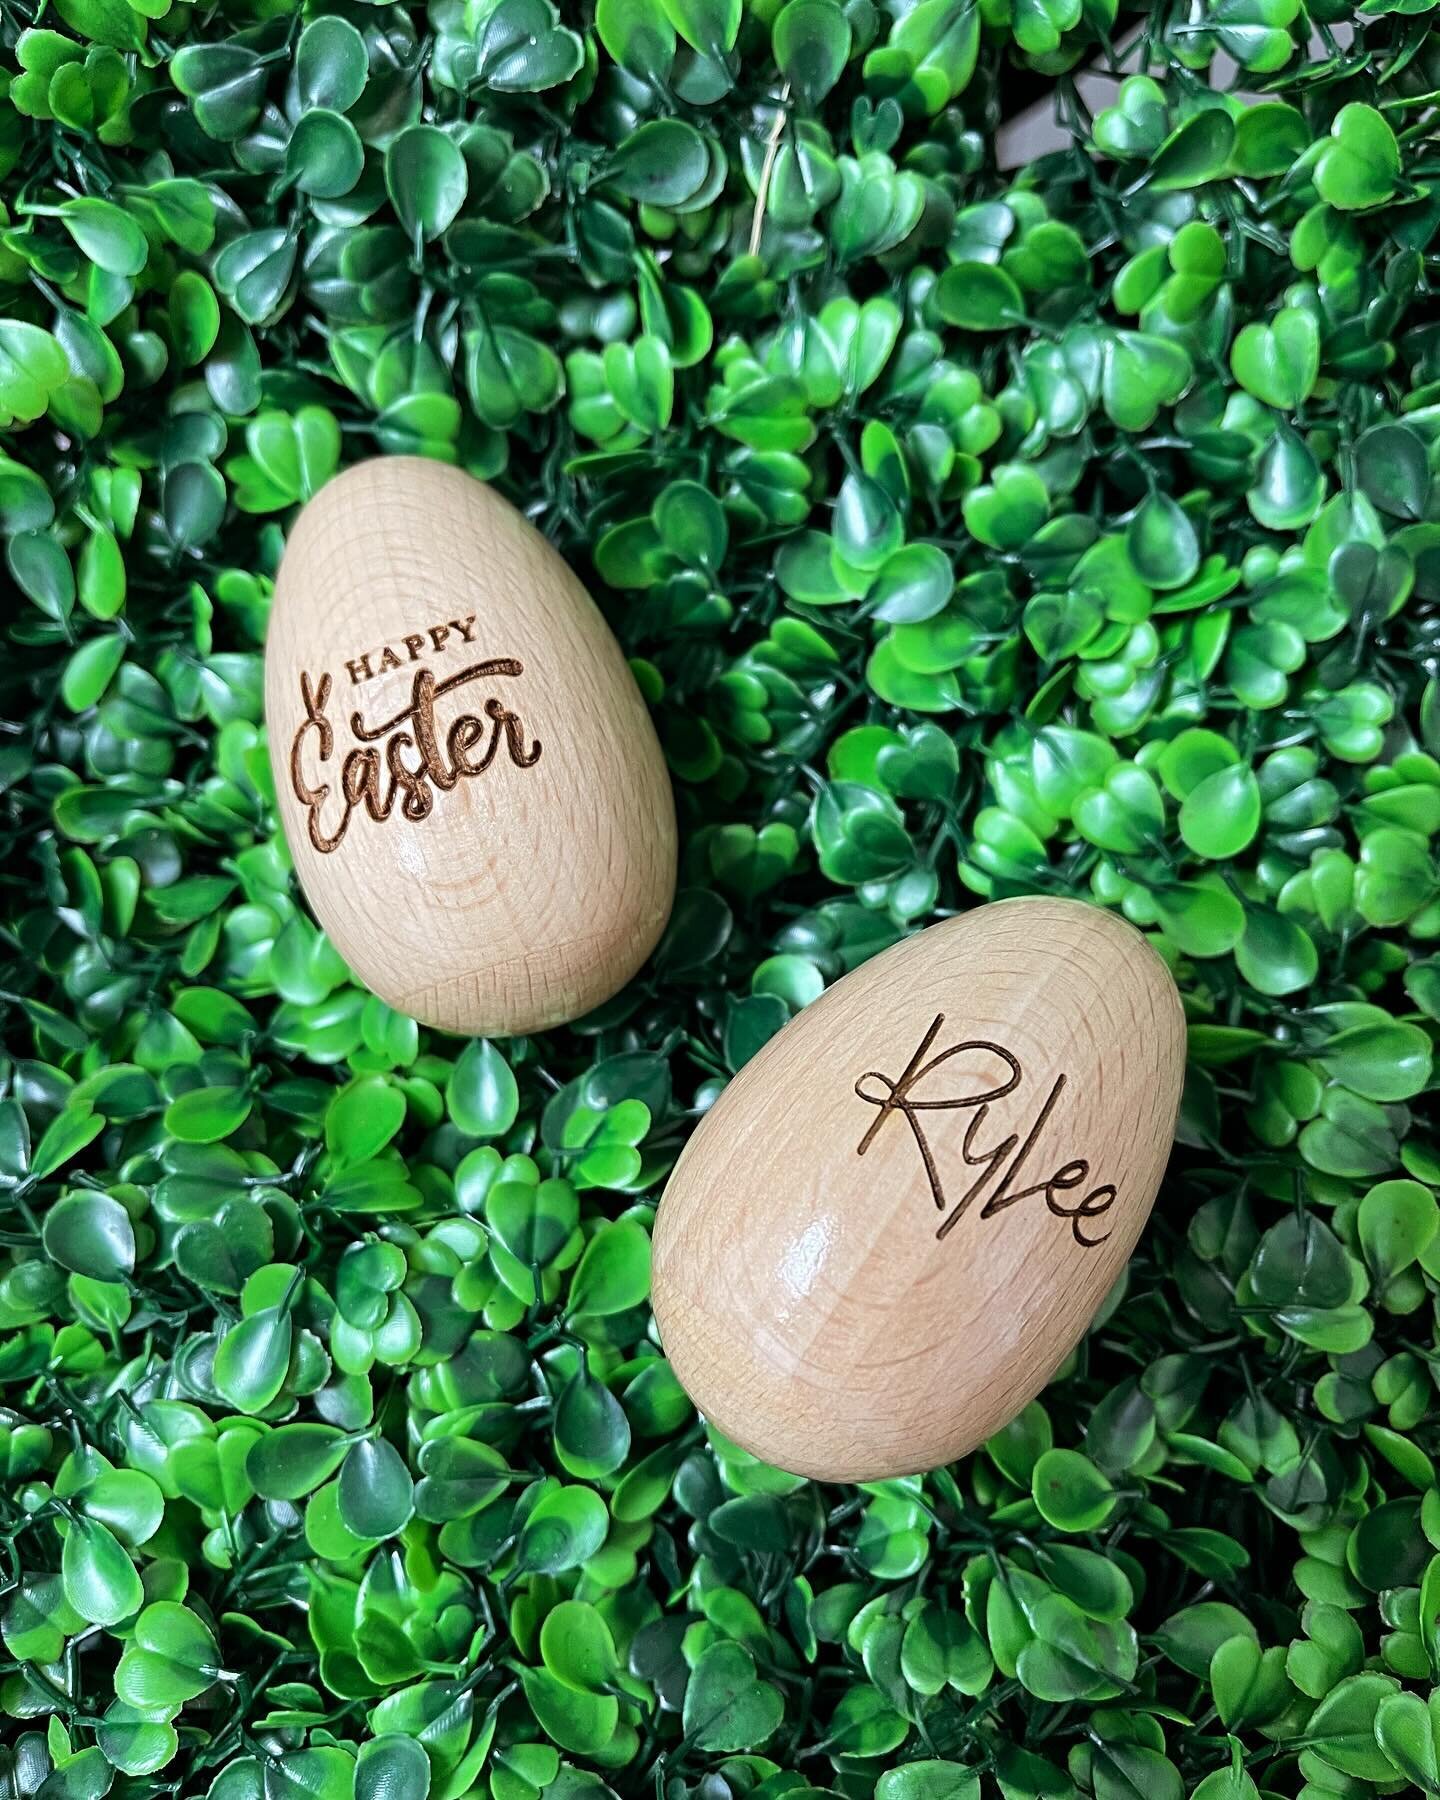 It&rsquo;s #Easter week and musical shakers are EVERYTHING to my toddlers so I had to engrave some egg shaped shakers for their baskets 👀
.
.
They can&rsquo;t read or write, but I know they care it&rsquo;s engraved. Right? Well, maybe it&rsquo;ll ta